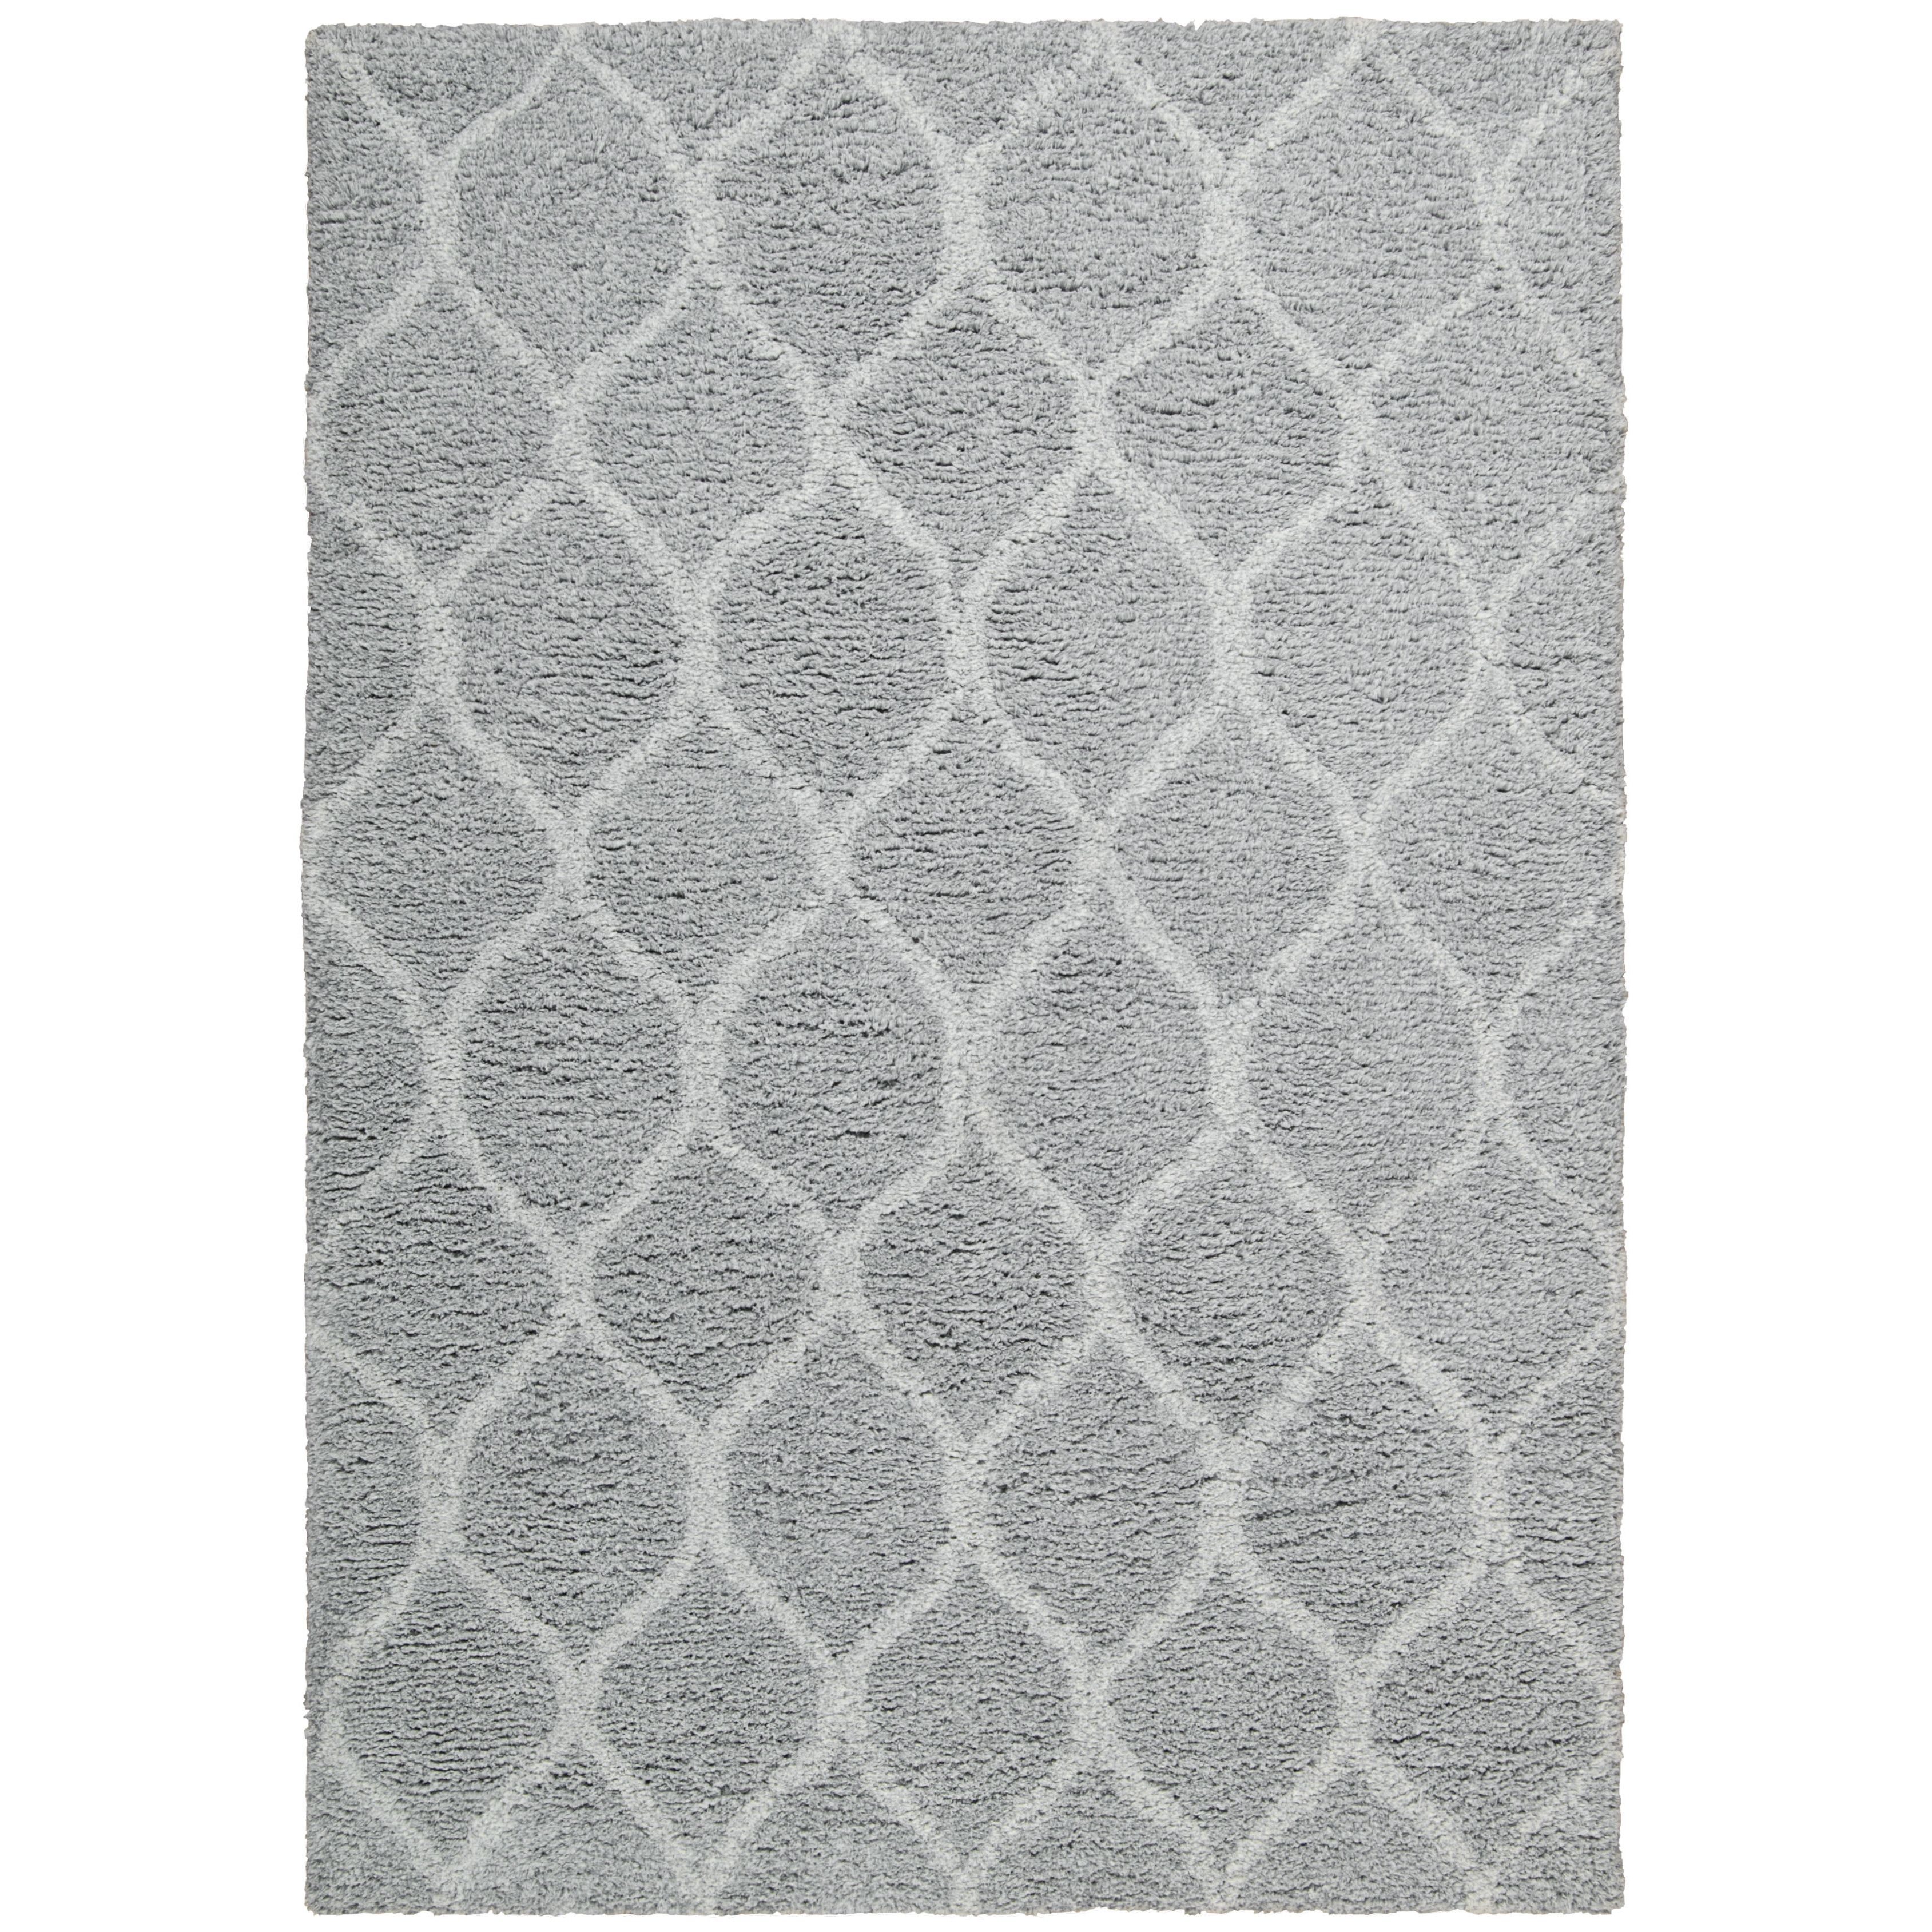 White And Gray Area Rugs Roselawnlutheran For Light Grey And White Rugs (View 4 of 15)